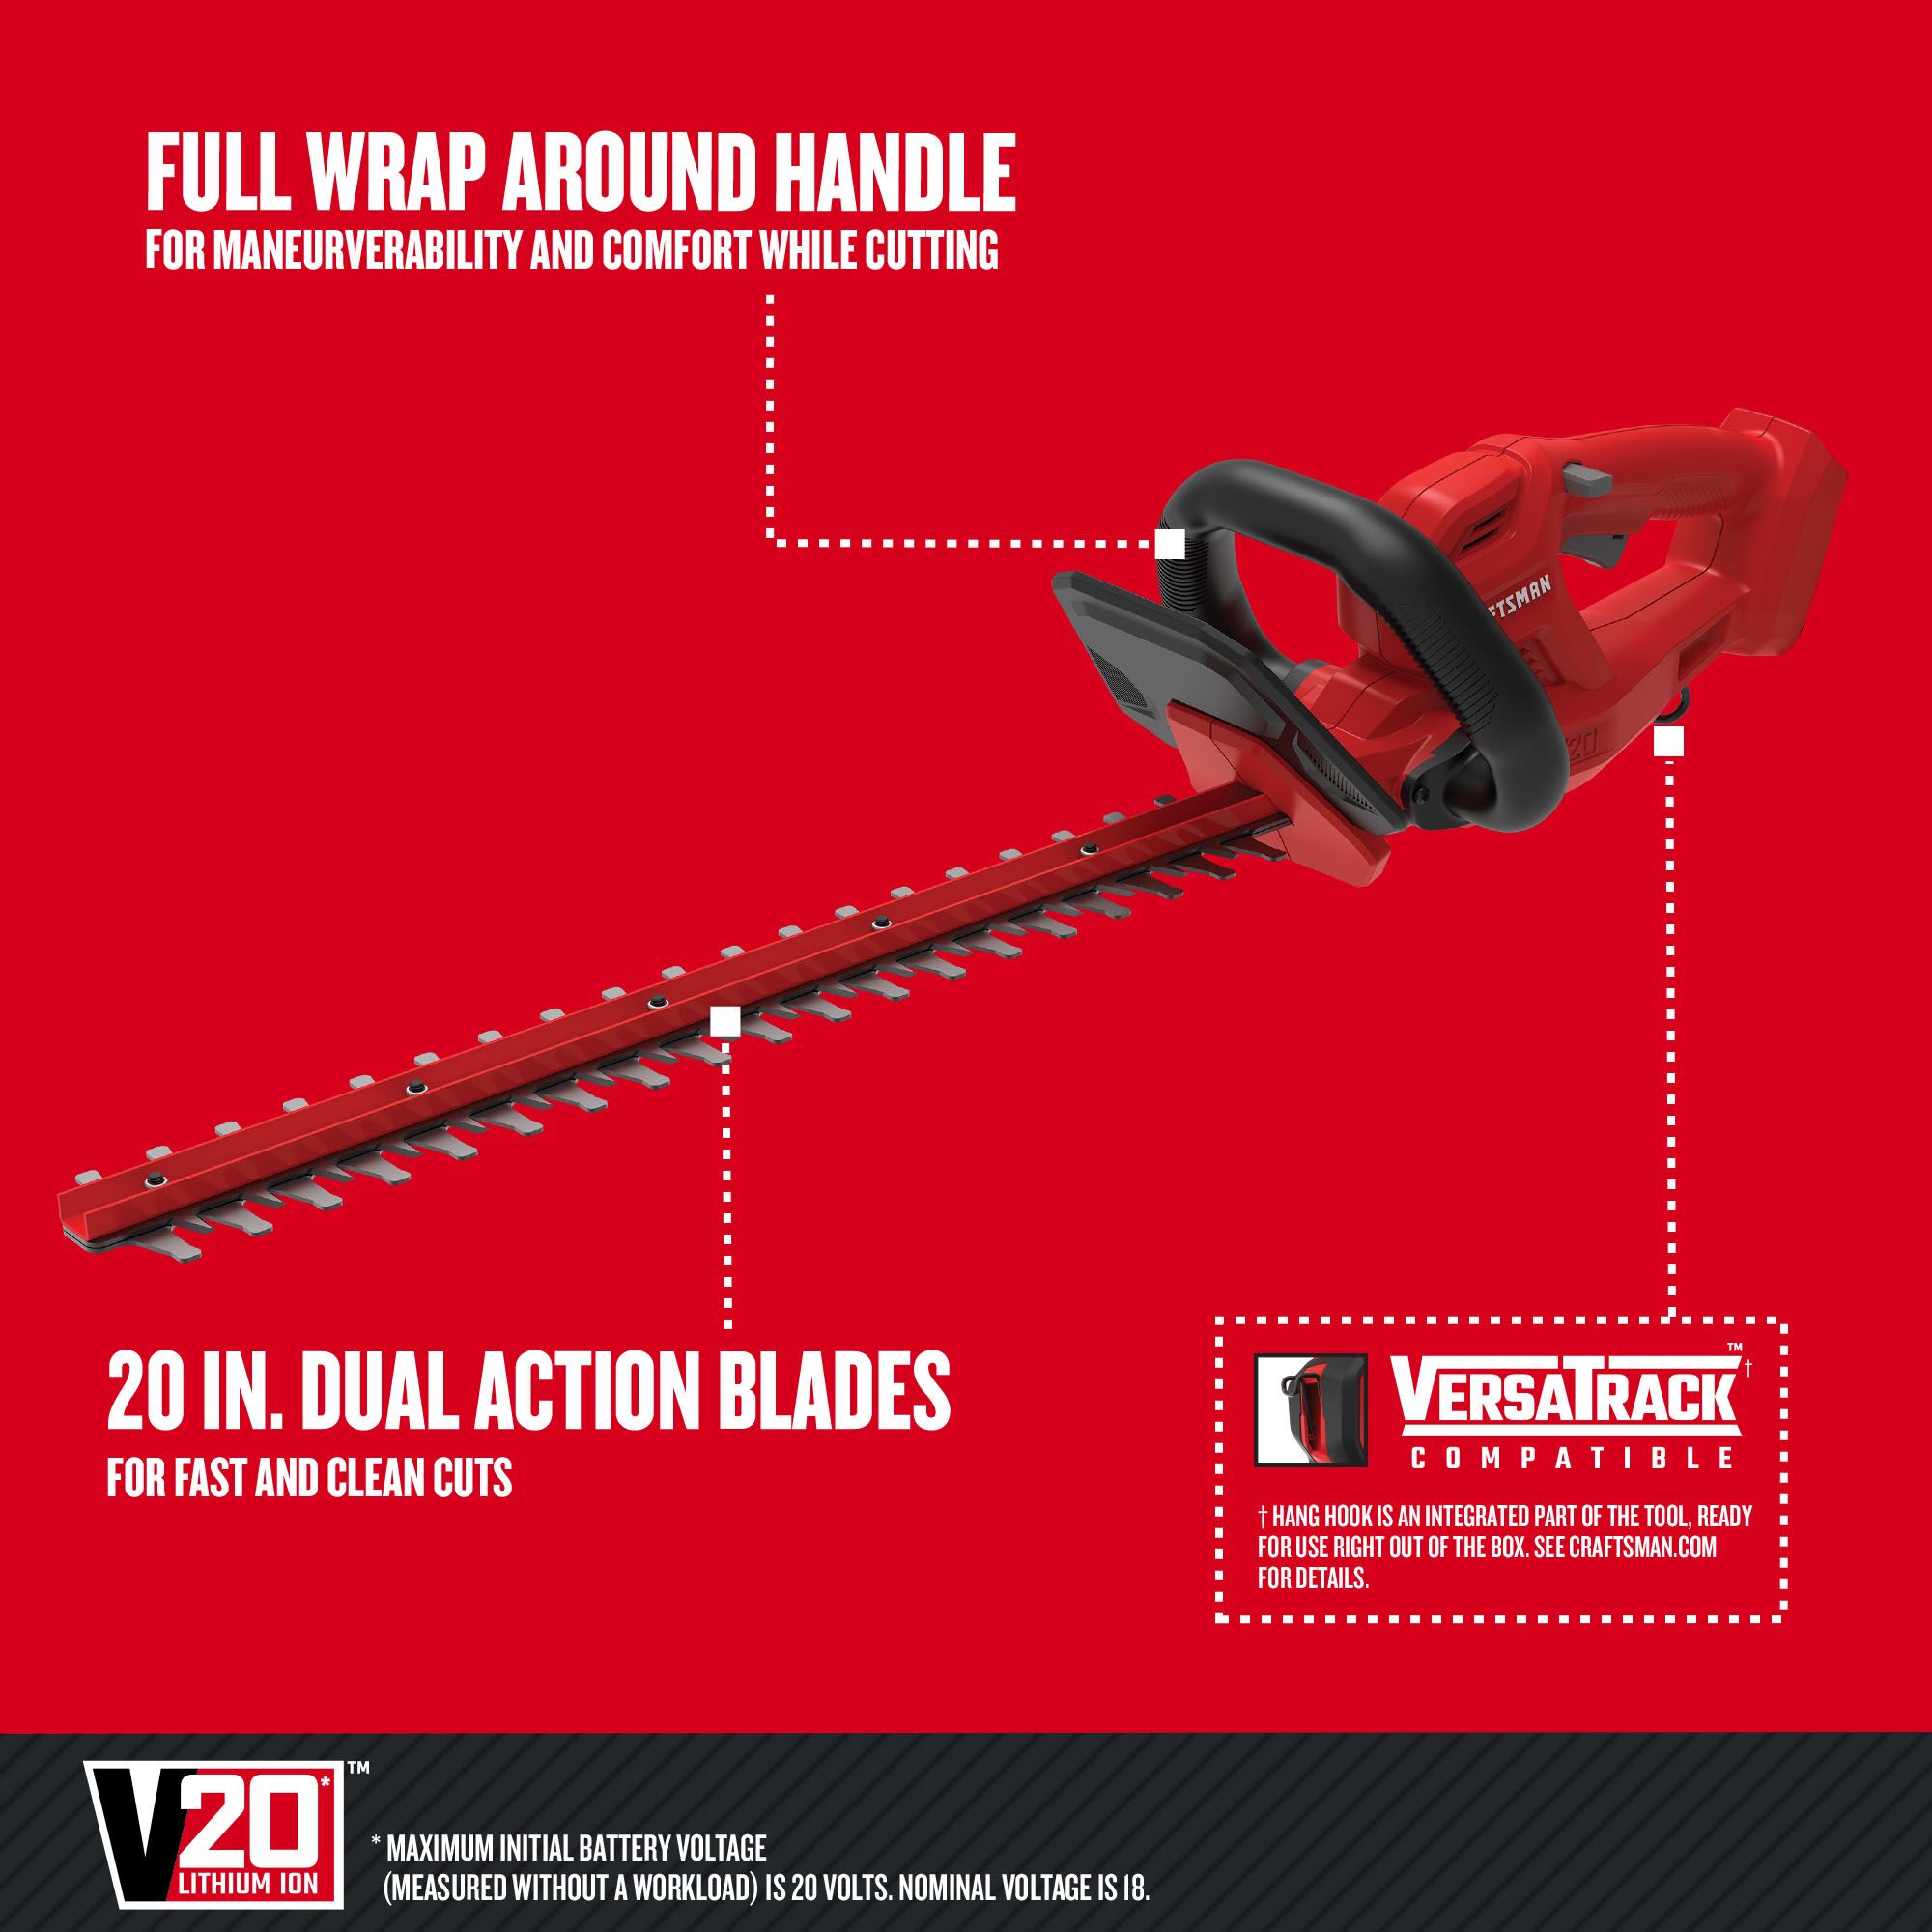 Graphic of CRAFTSMAN Hedge Trimmers highlighting product features